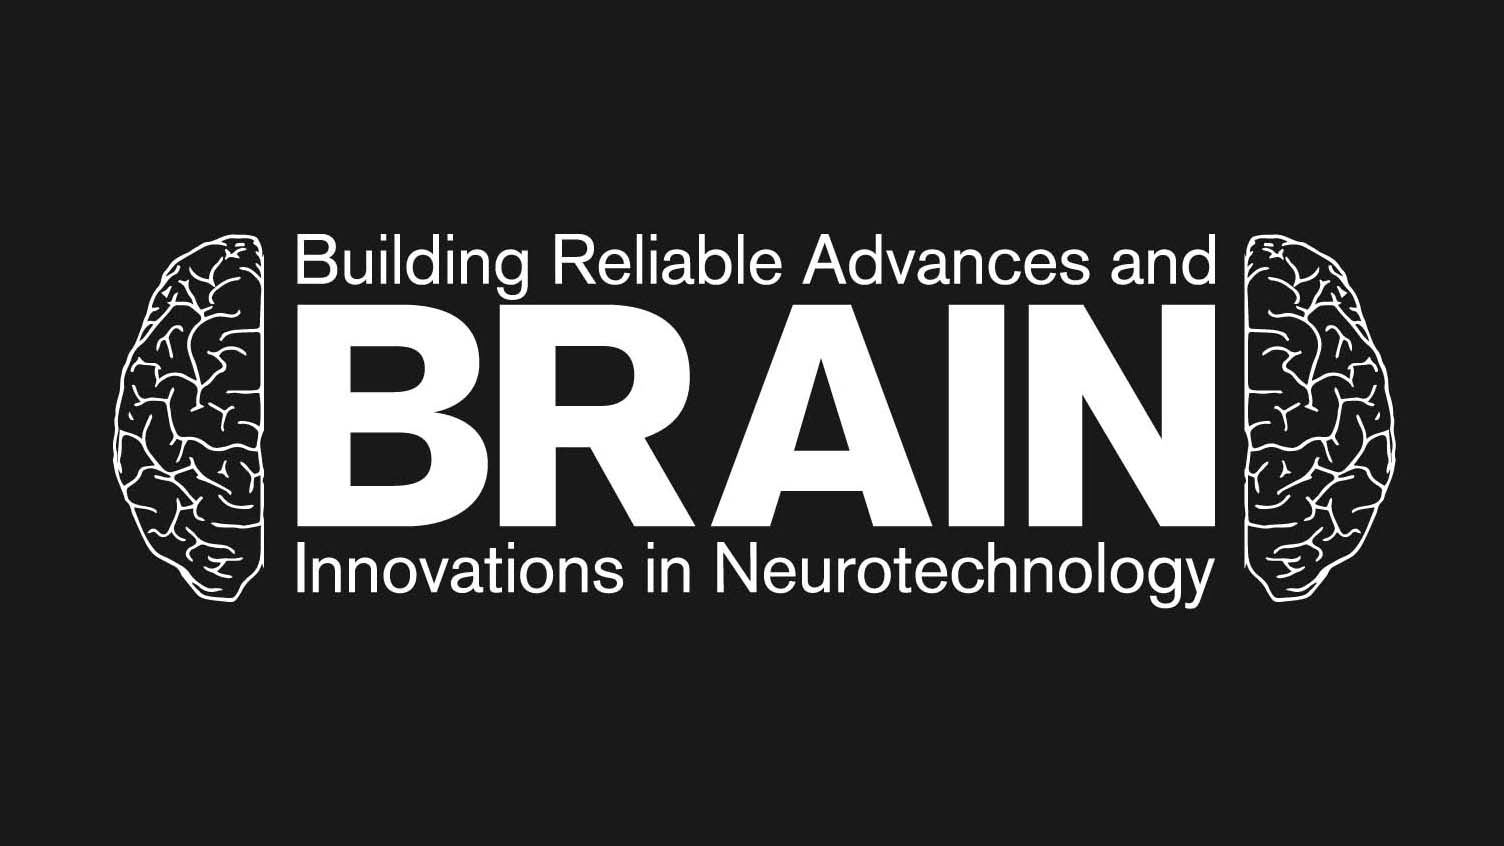 BRAIN Logo: Building Reliable Advances and Innovation in Neurotechnology